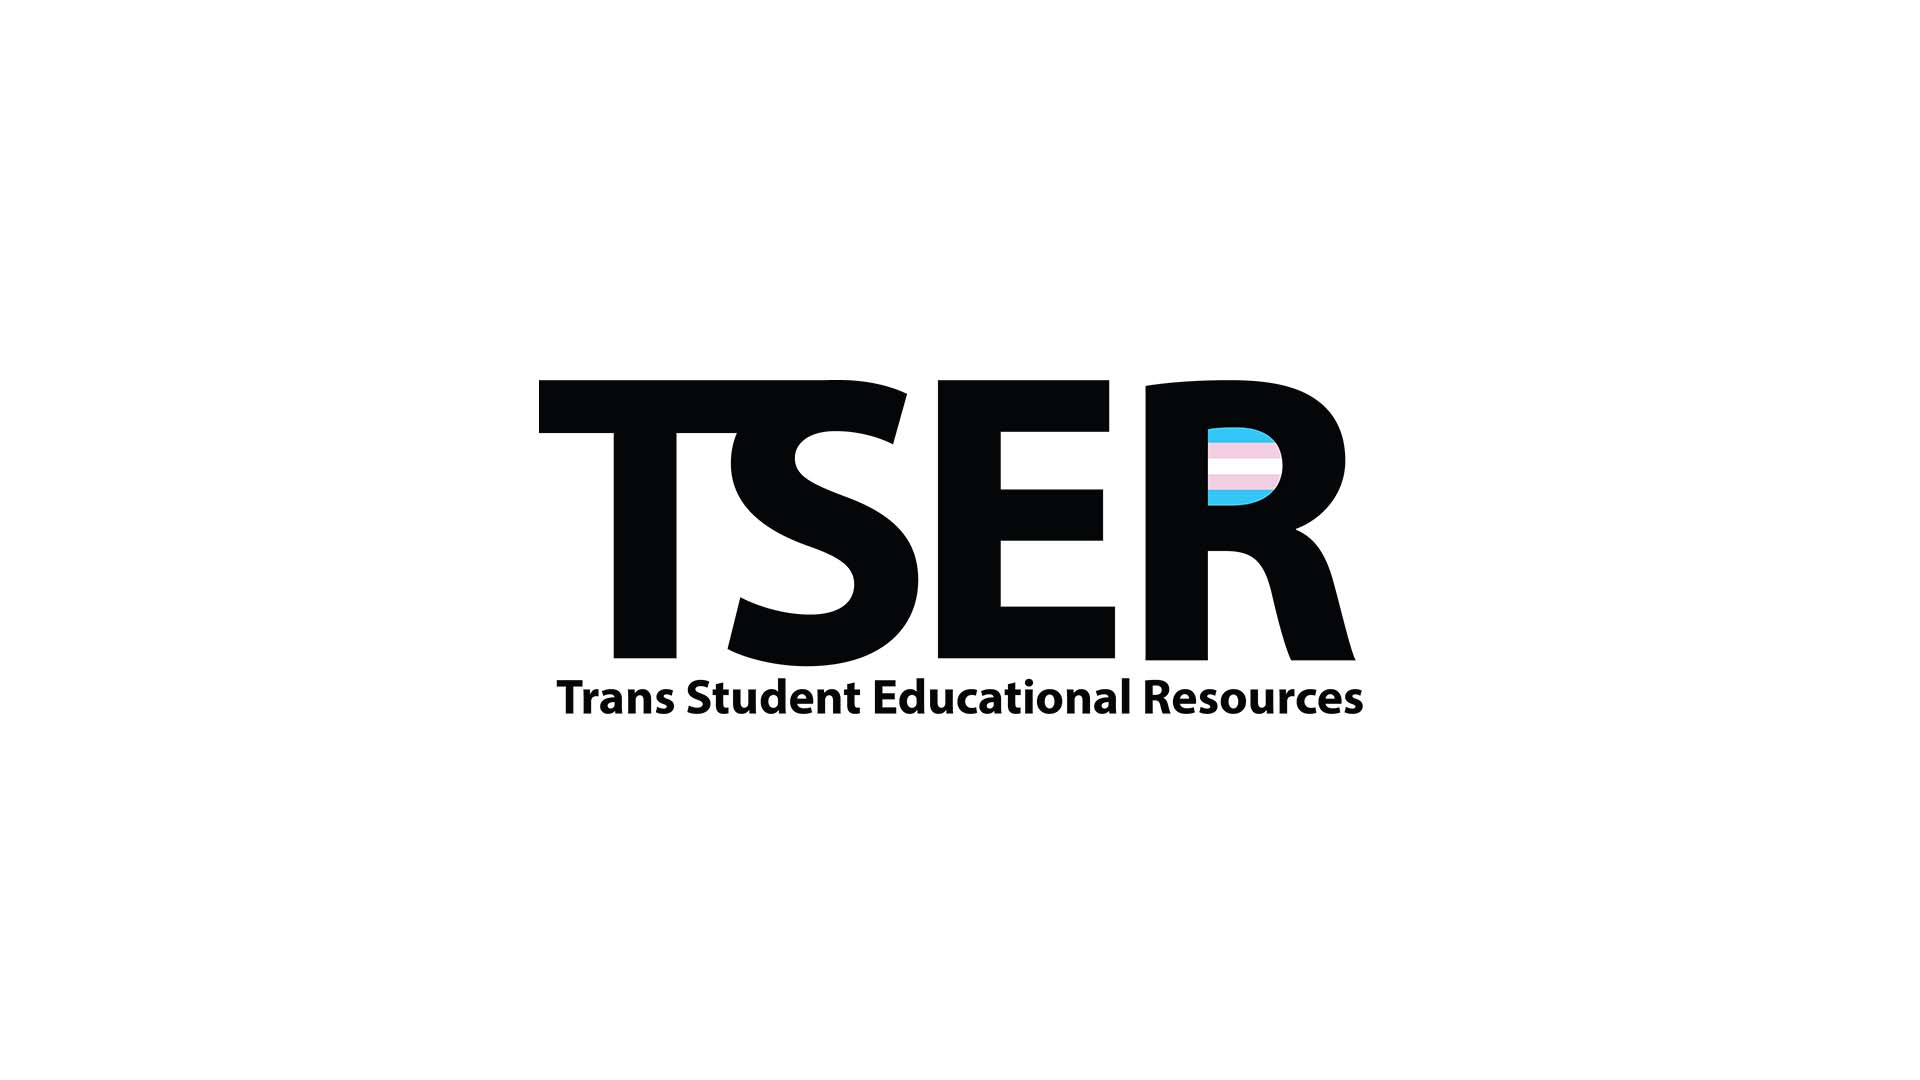 The logo of 'TSER', the trans student educational resources, with transgender flag within the letter 'R'. White background.